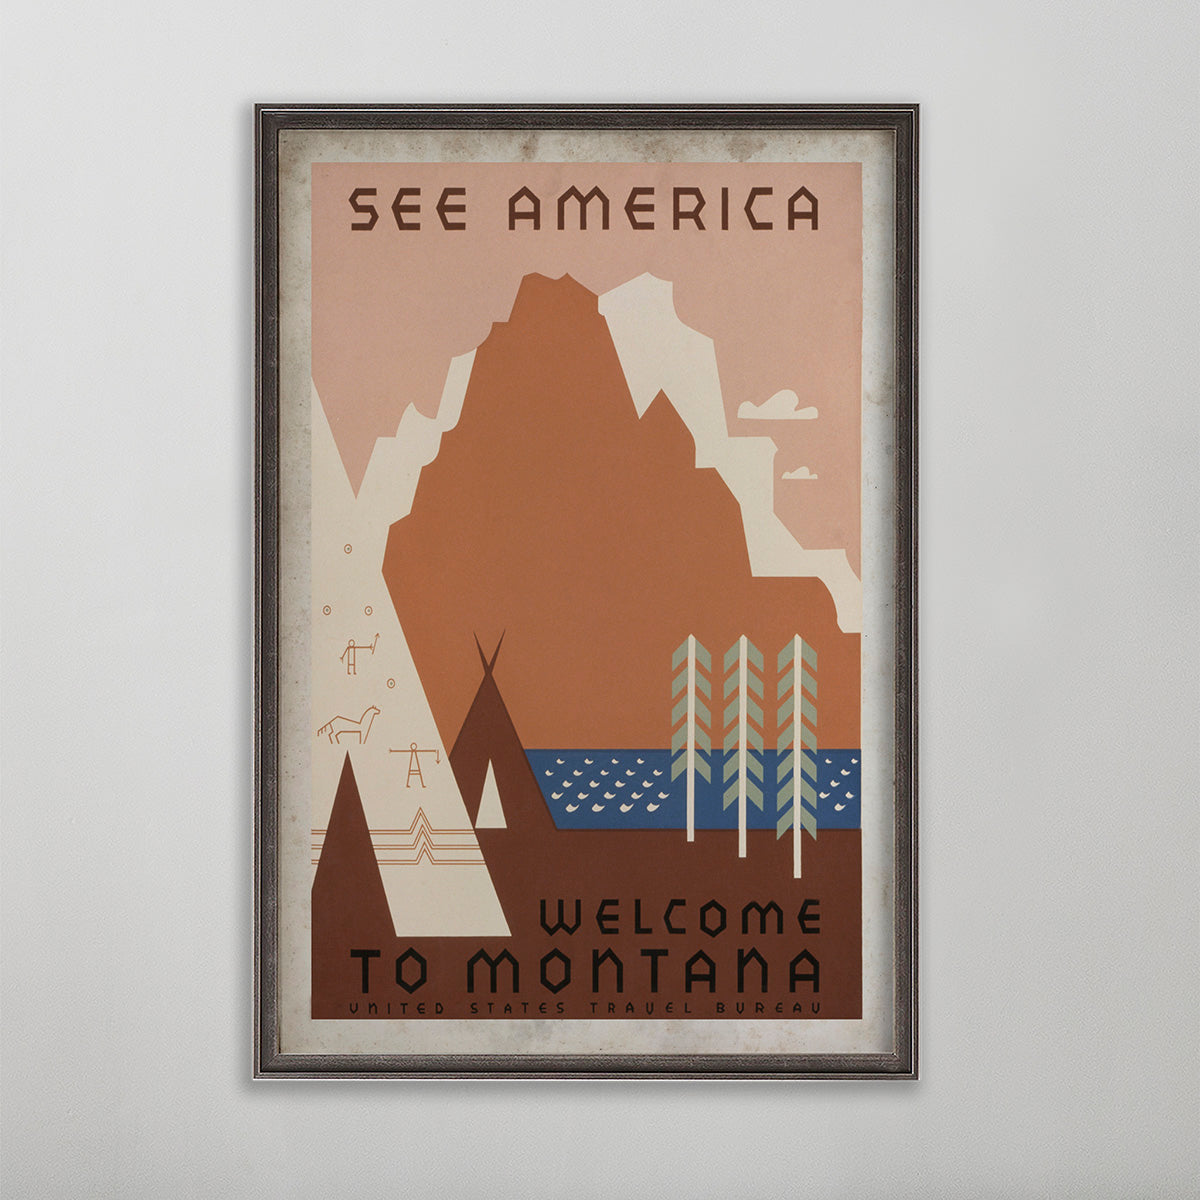 Montana vintage travel poster. A mountain in the background and a teepee with trees by a lake.